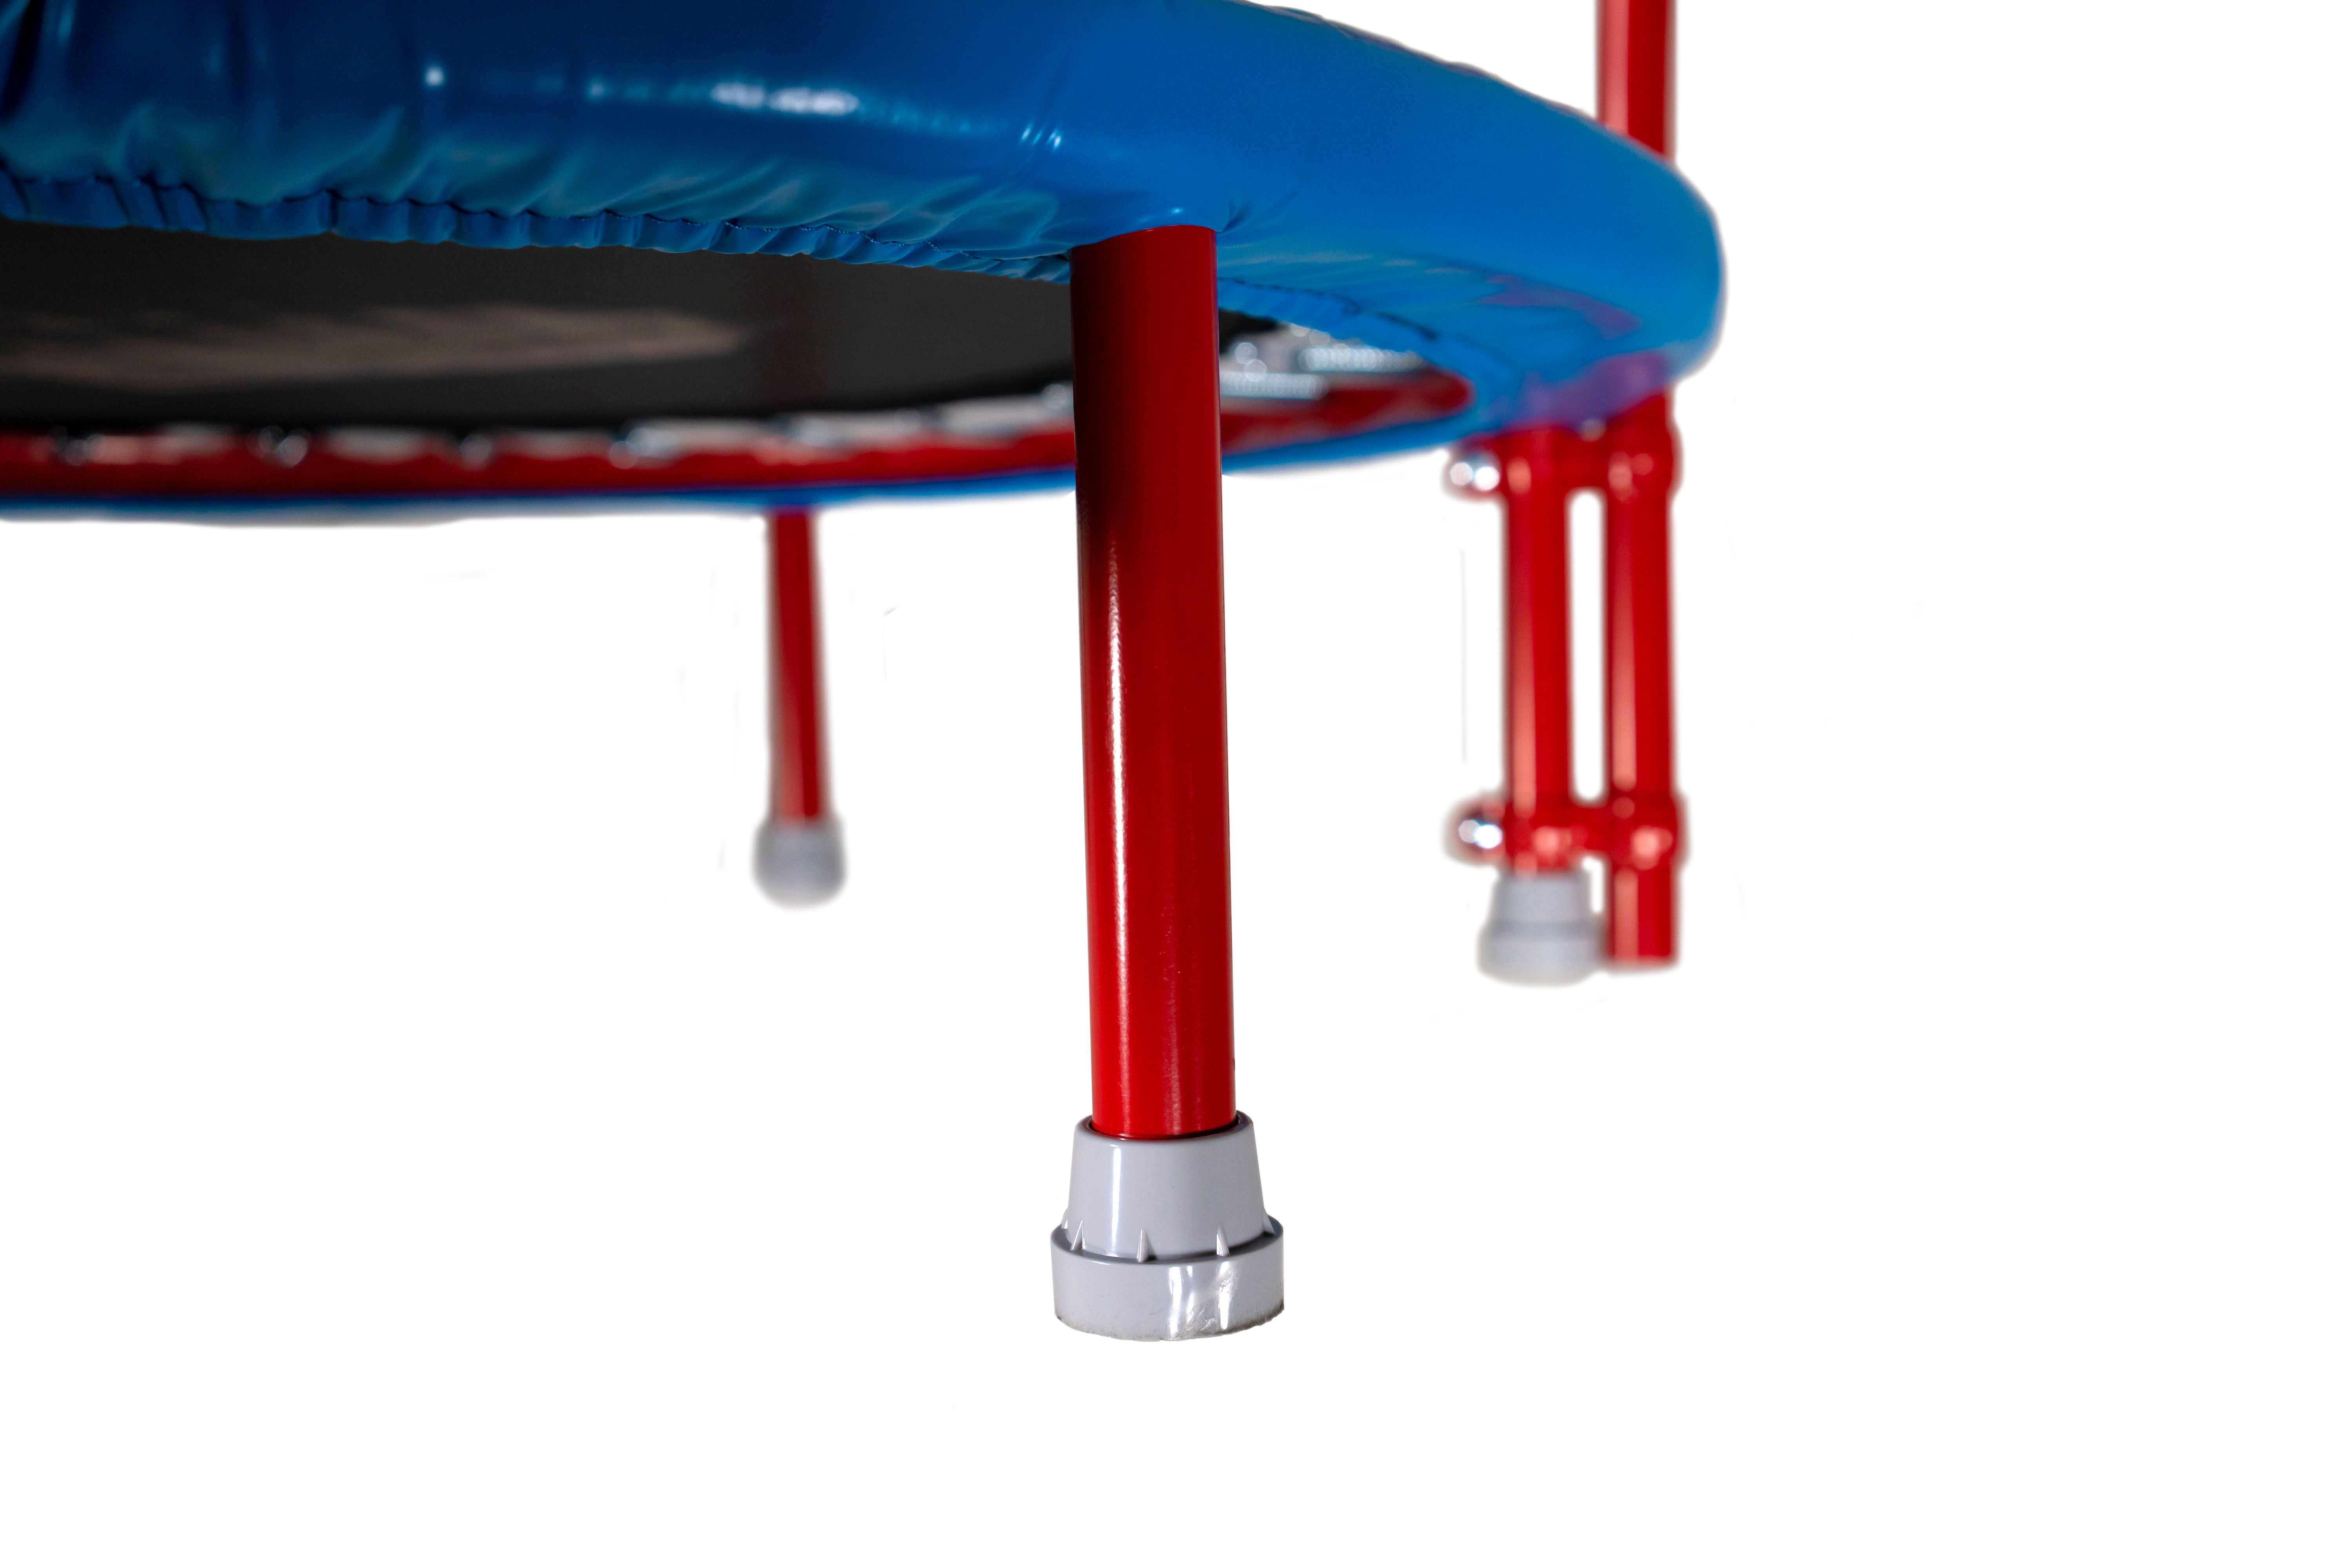 My First Superman 36-Inch Trampoline, with Handlebar - image 2 of 6